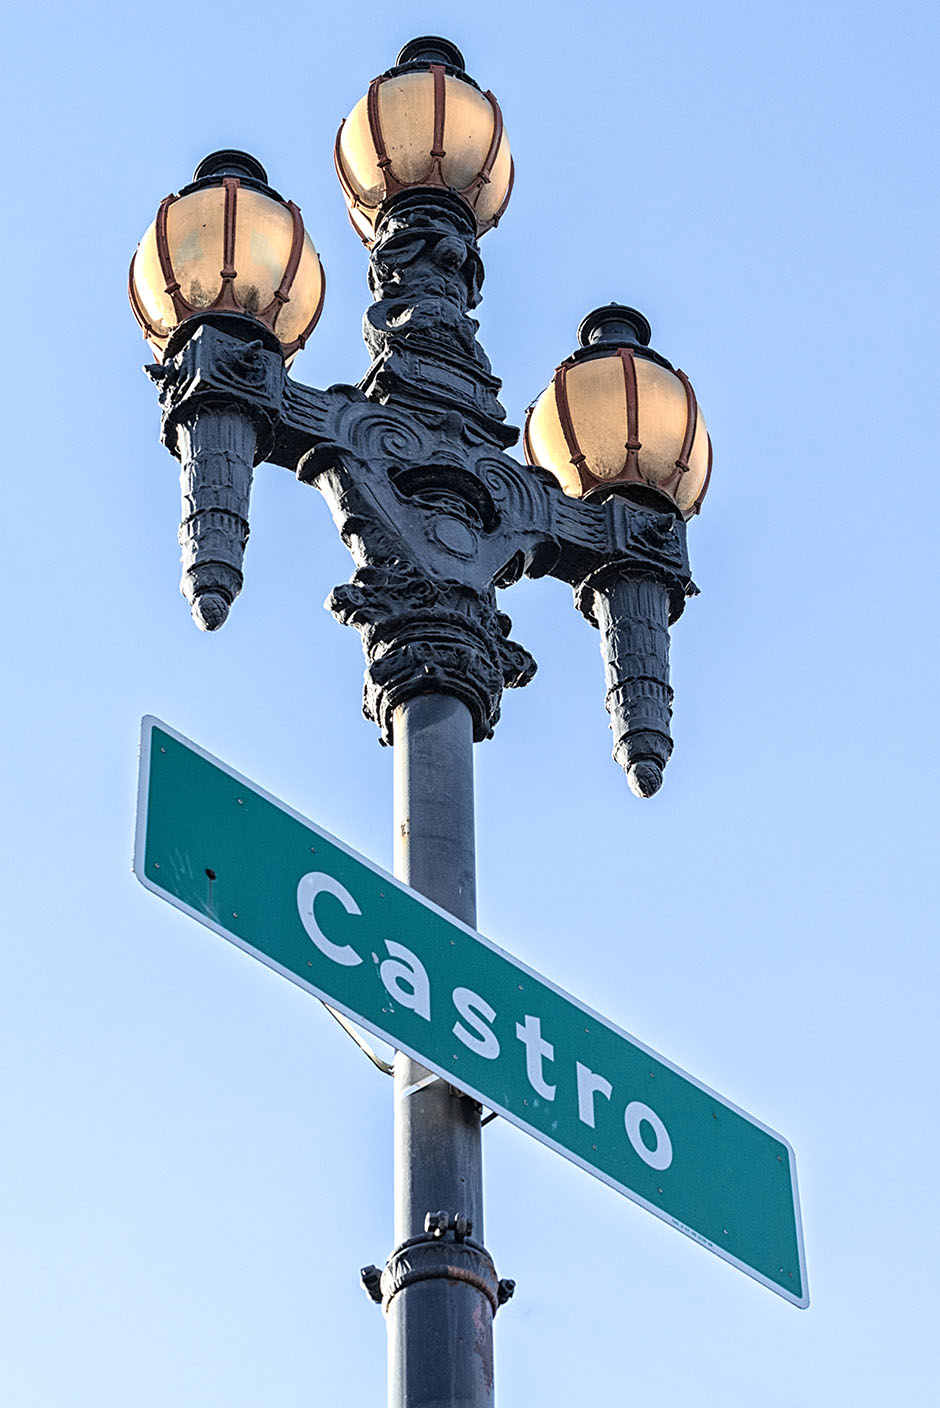 Lamp post from Castro Street and Market Street, San Francisco.